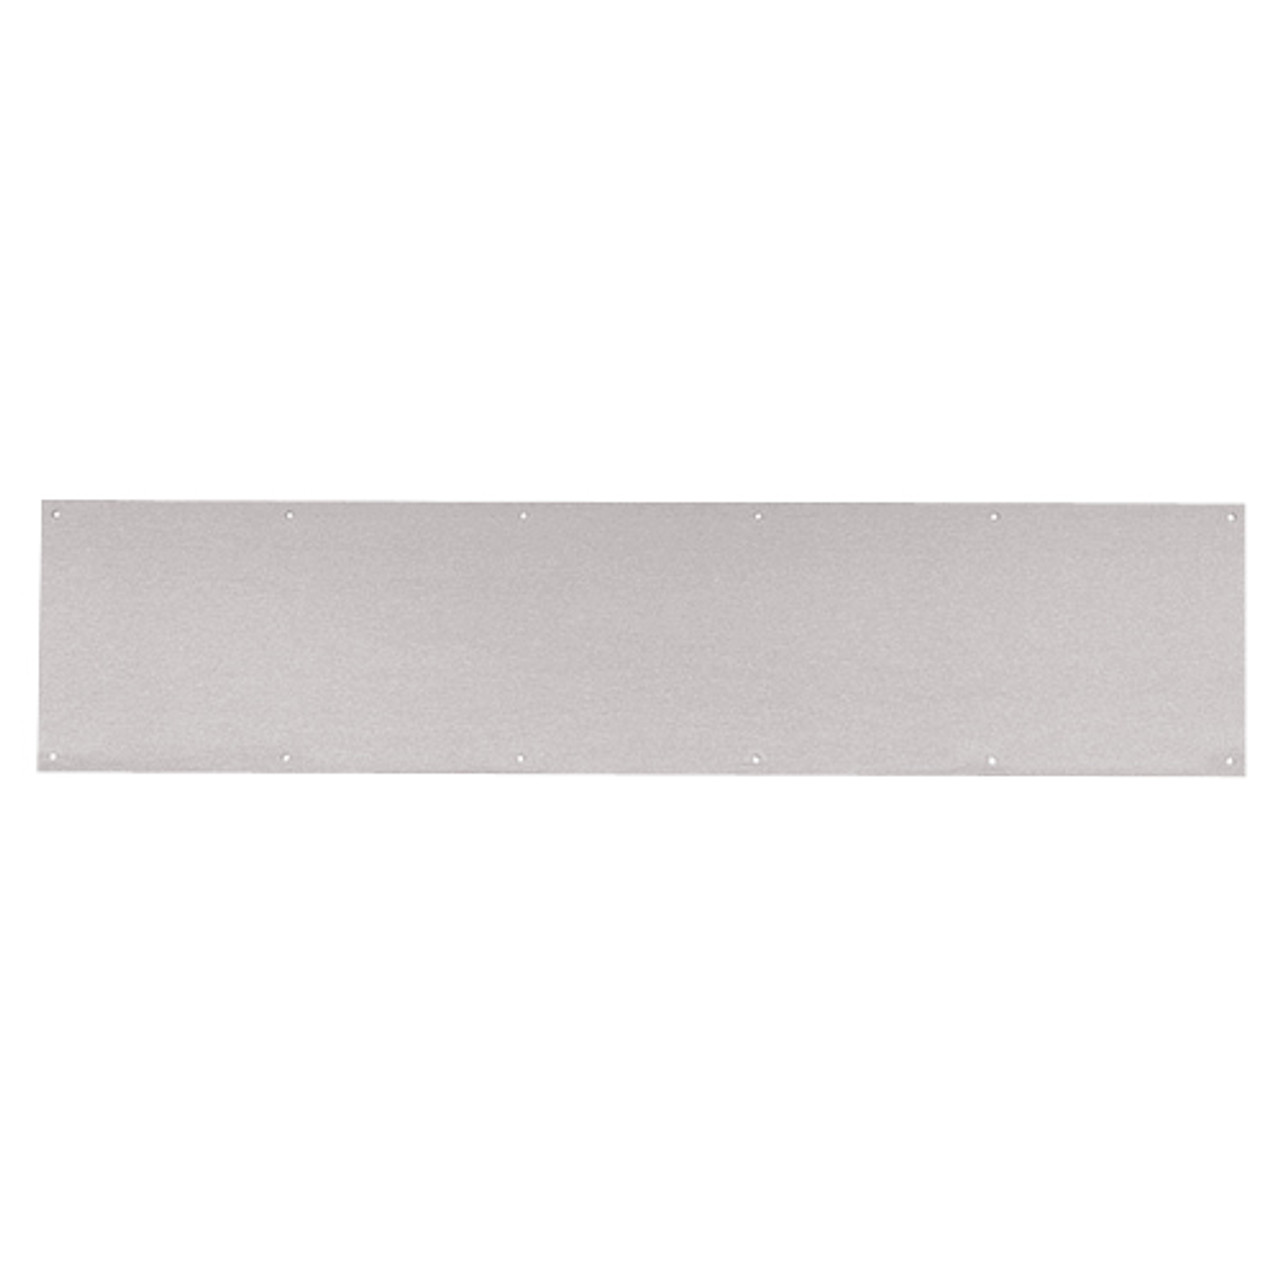 8400-US32D-36x45-B-CS Ives 8400 Series Protection Plate in Satin Stainless Steel